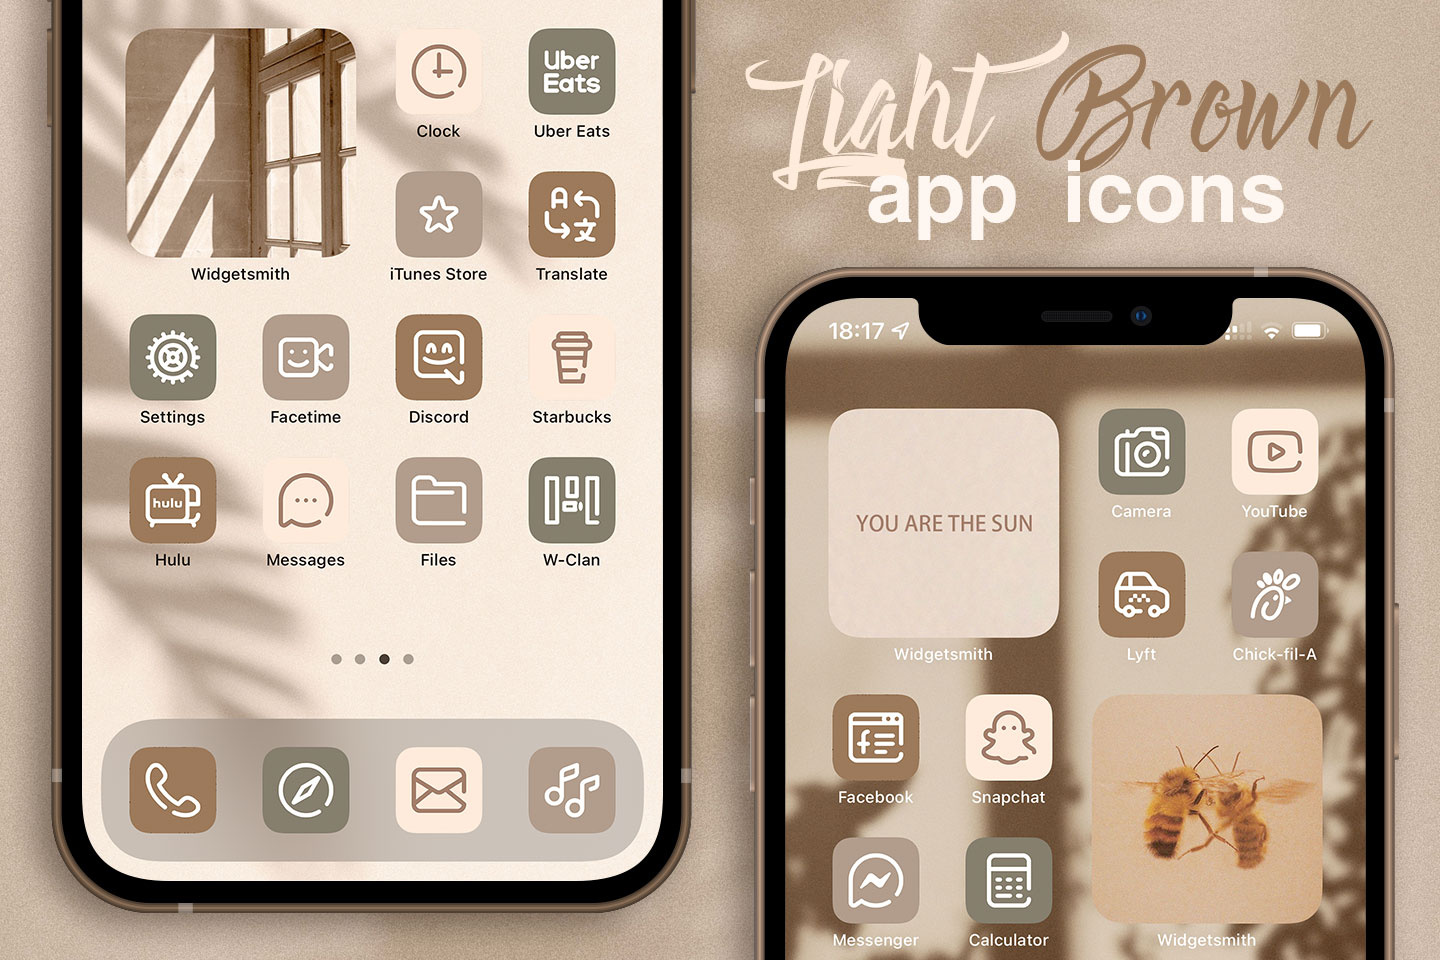 light brown app icons pack